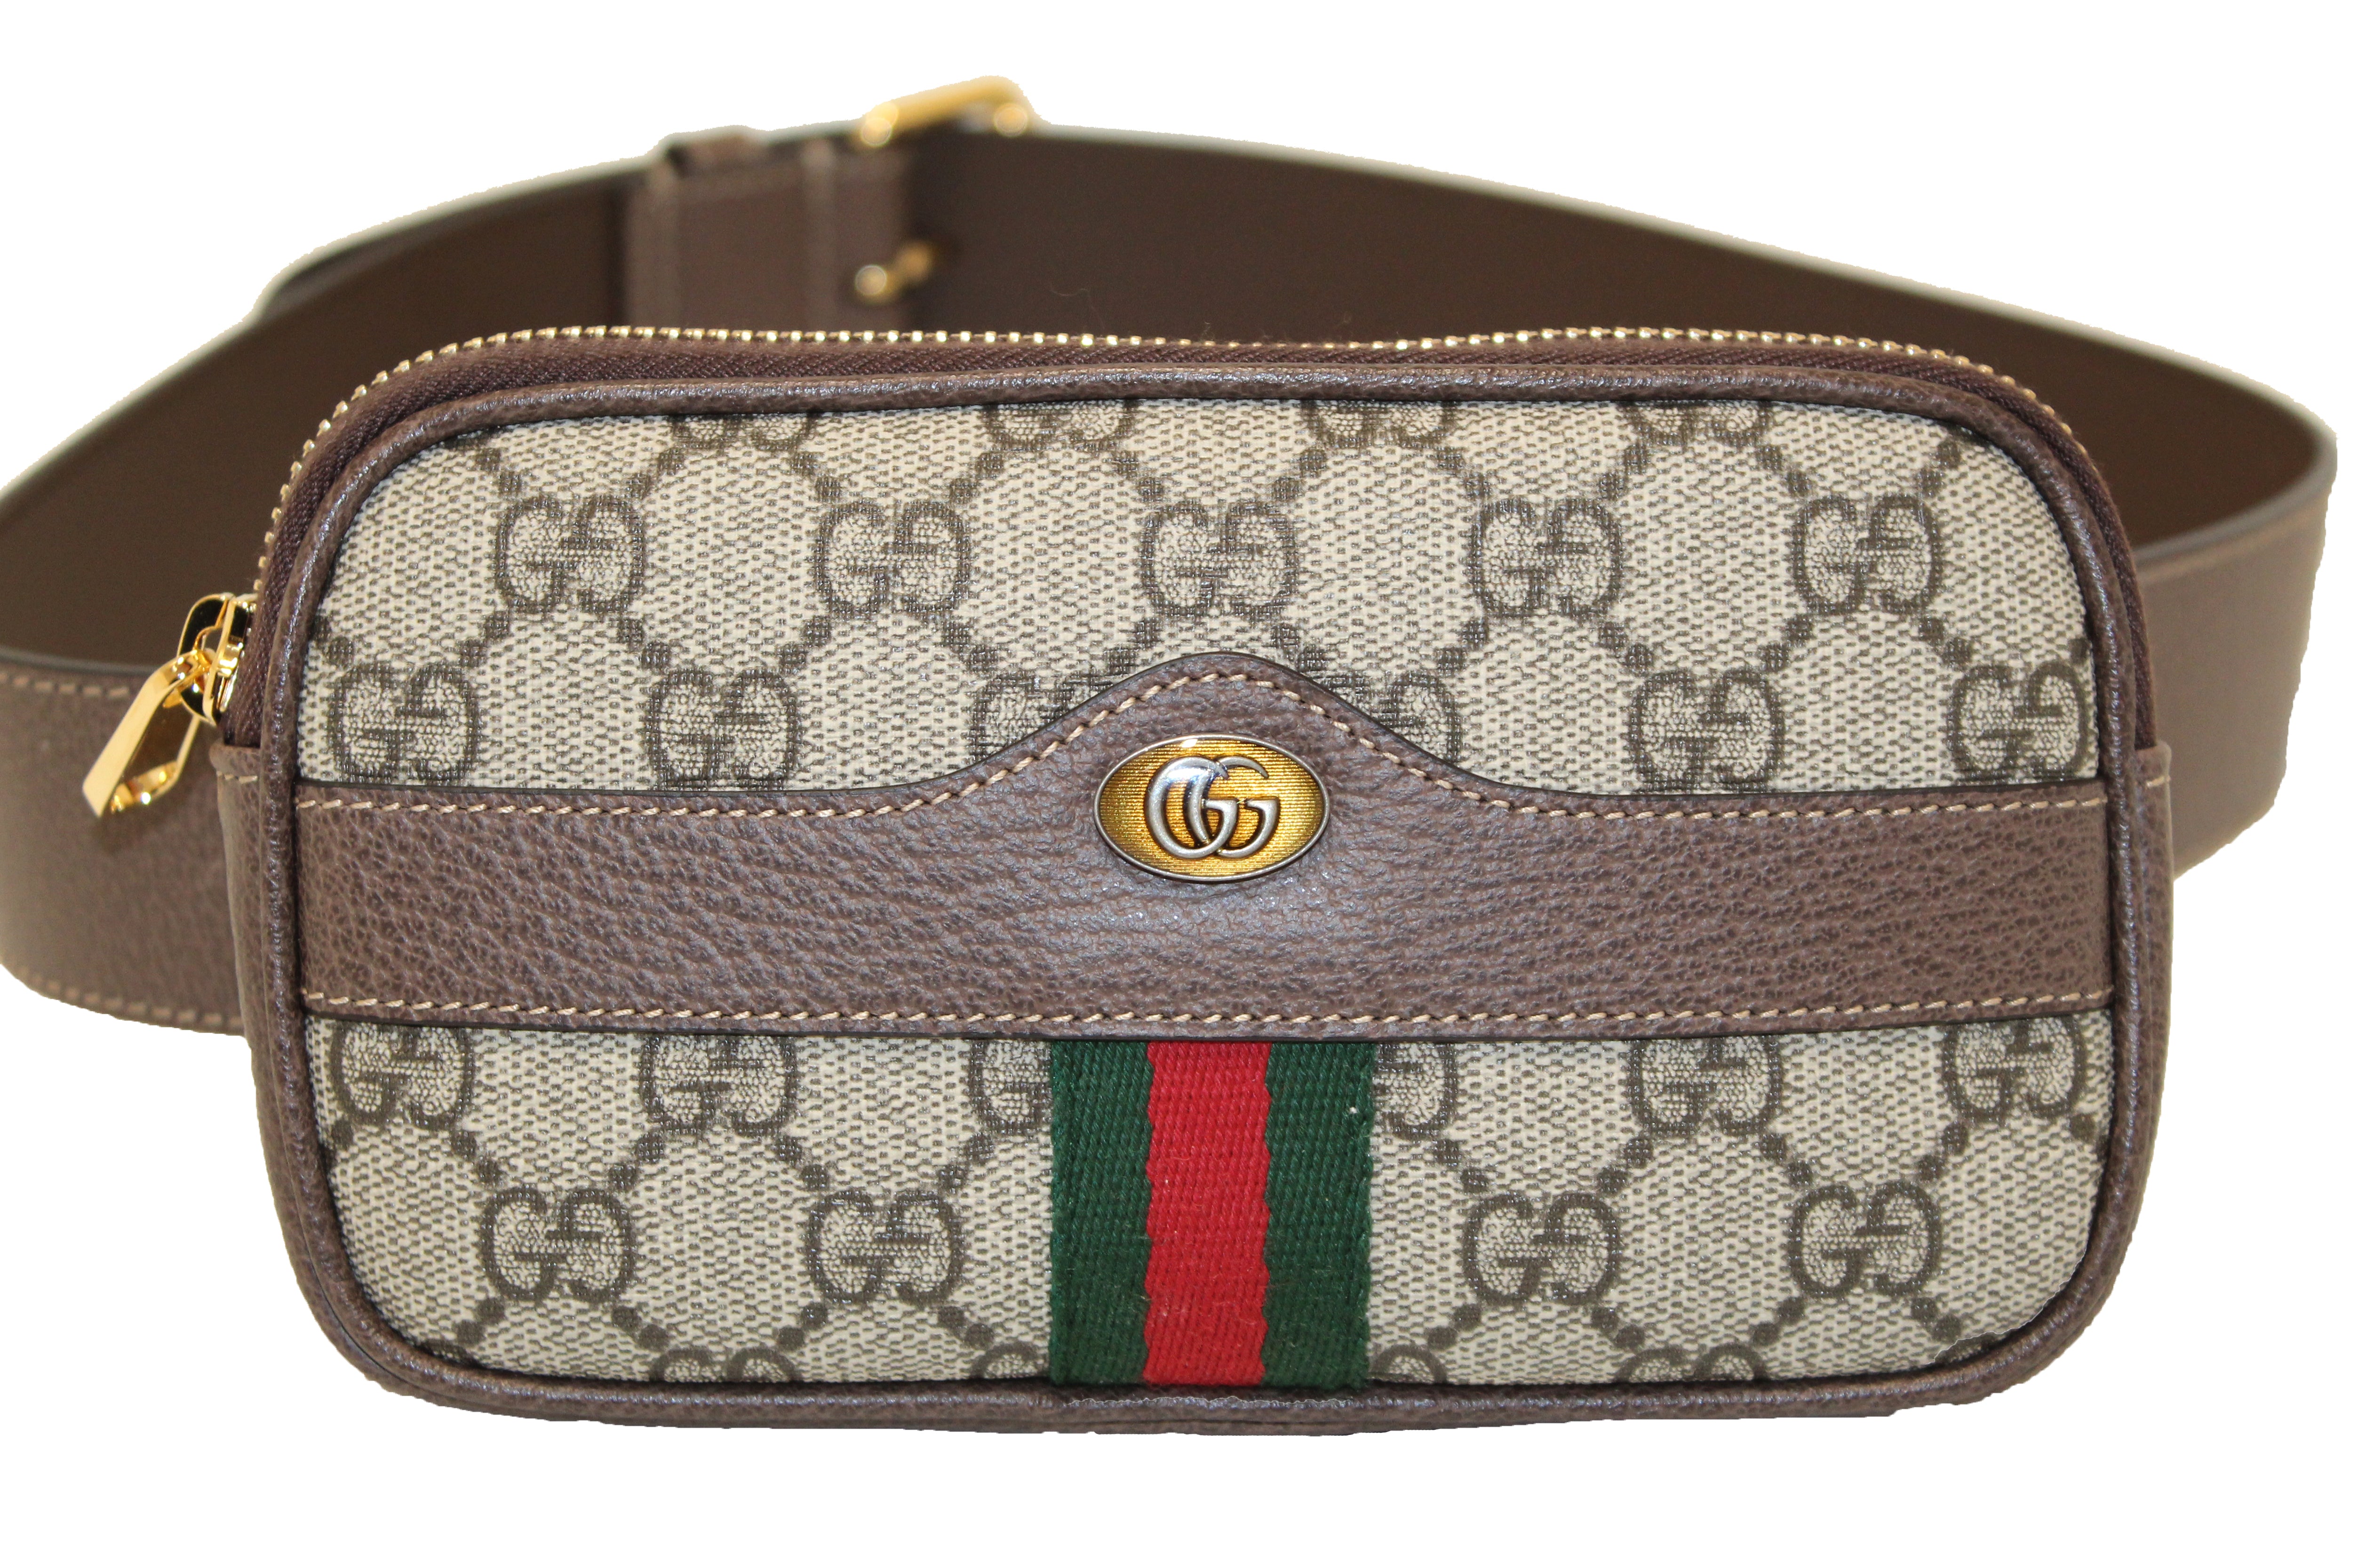 Gucci Ophidia Small Suede Belt Bag, Shop Our POPSUGAR Editors' Gift Guide!  130+ Top Presents For Everyone on Your List